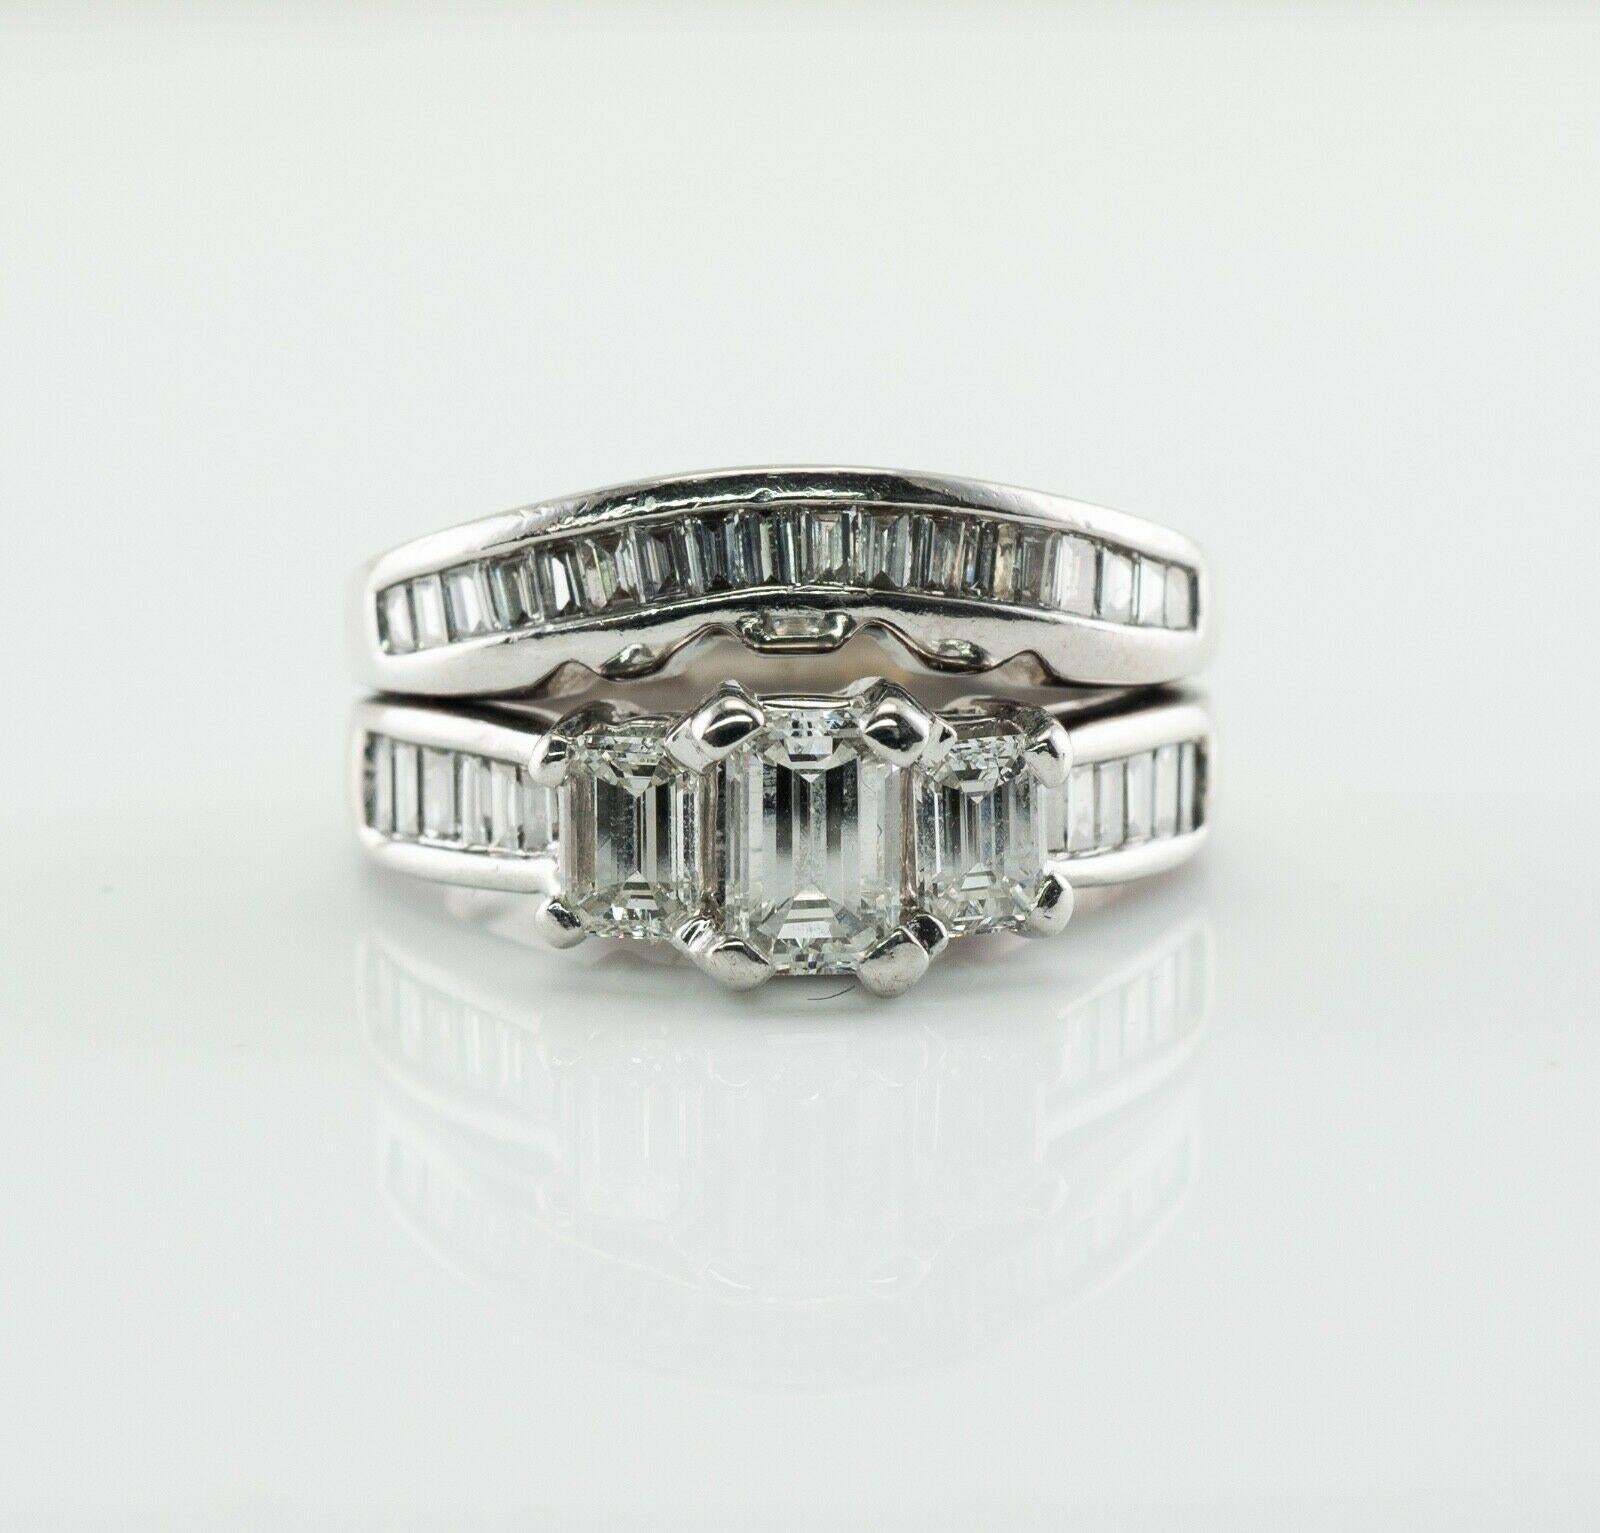 This gorgeous estate ring is finely crafted in solid 14K White gold and set with white and fiery diamonds. Two bands are soldered together. The upper band has three emerald cut diamonds, .25 carat for the center gem and .16 carats for two side gems.